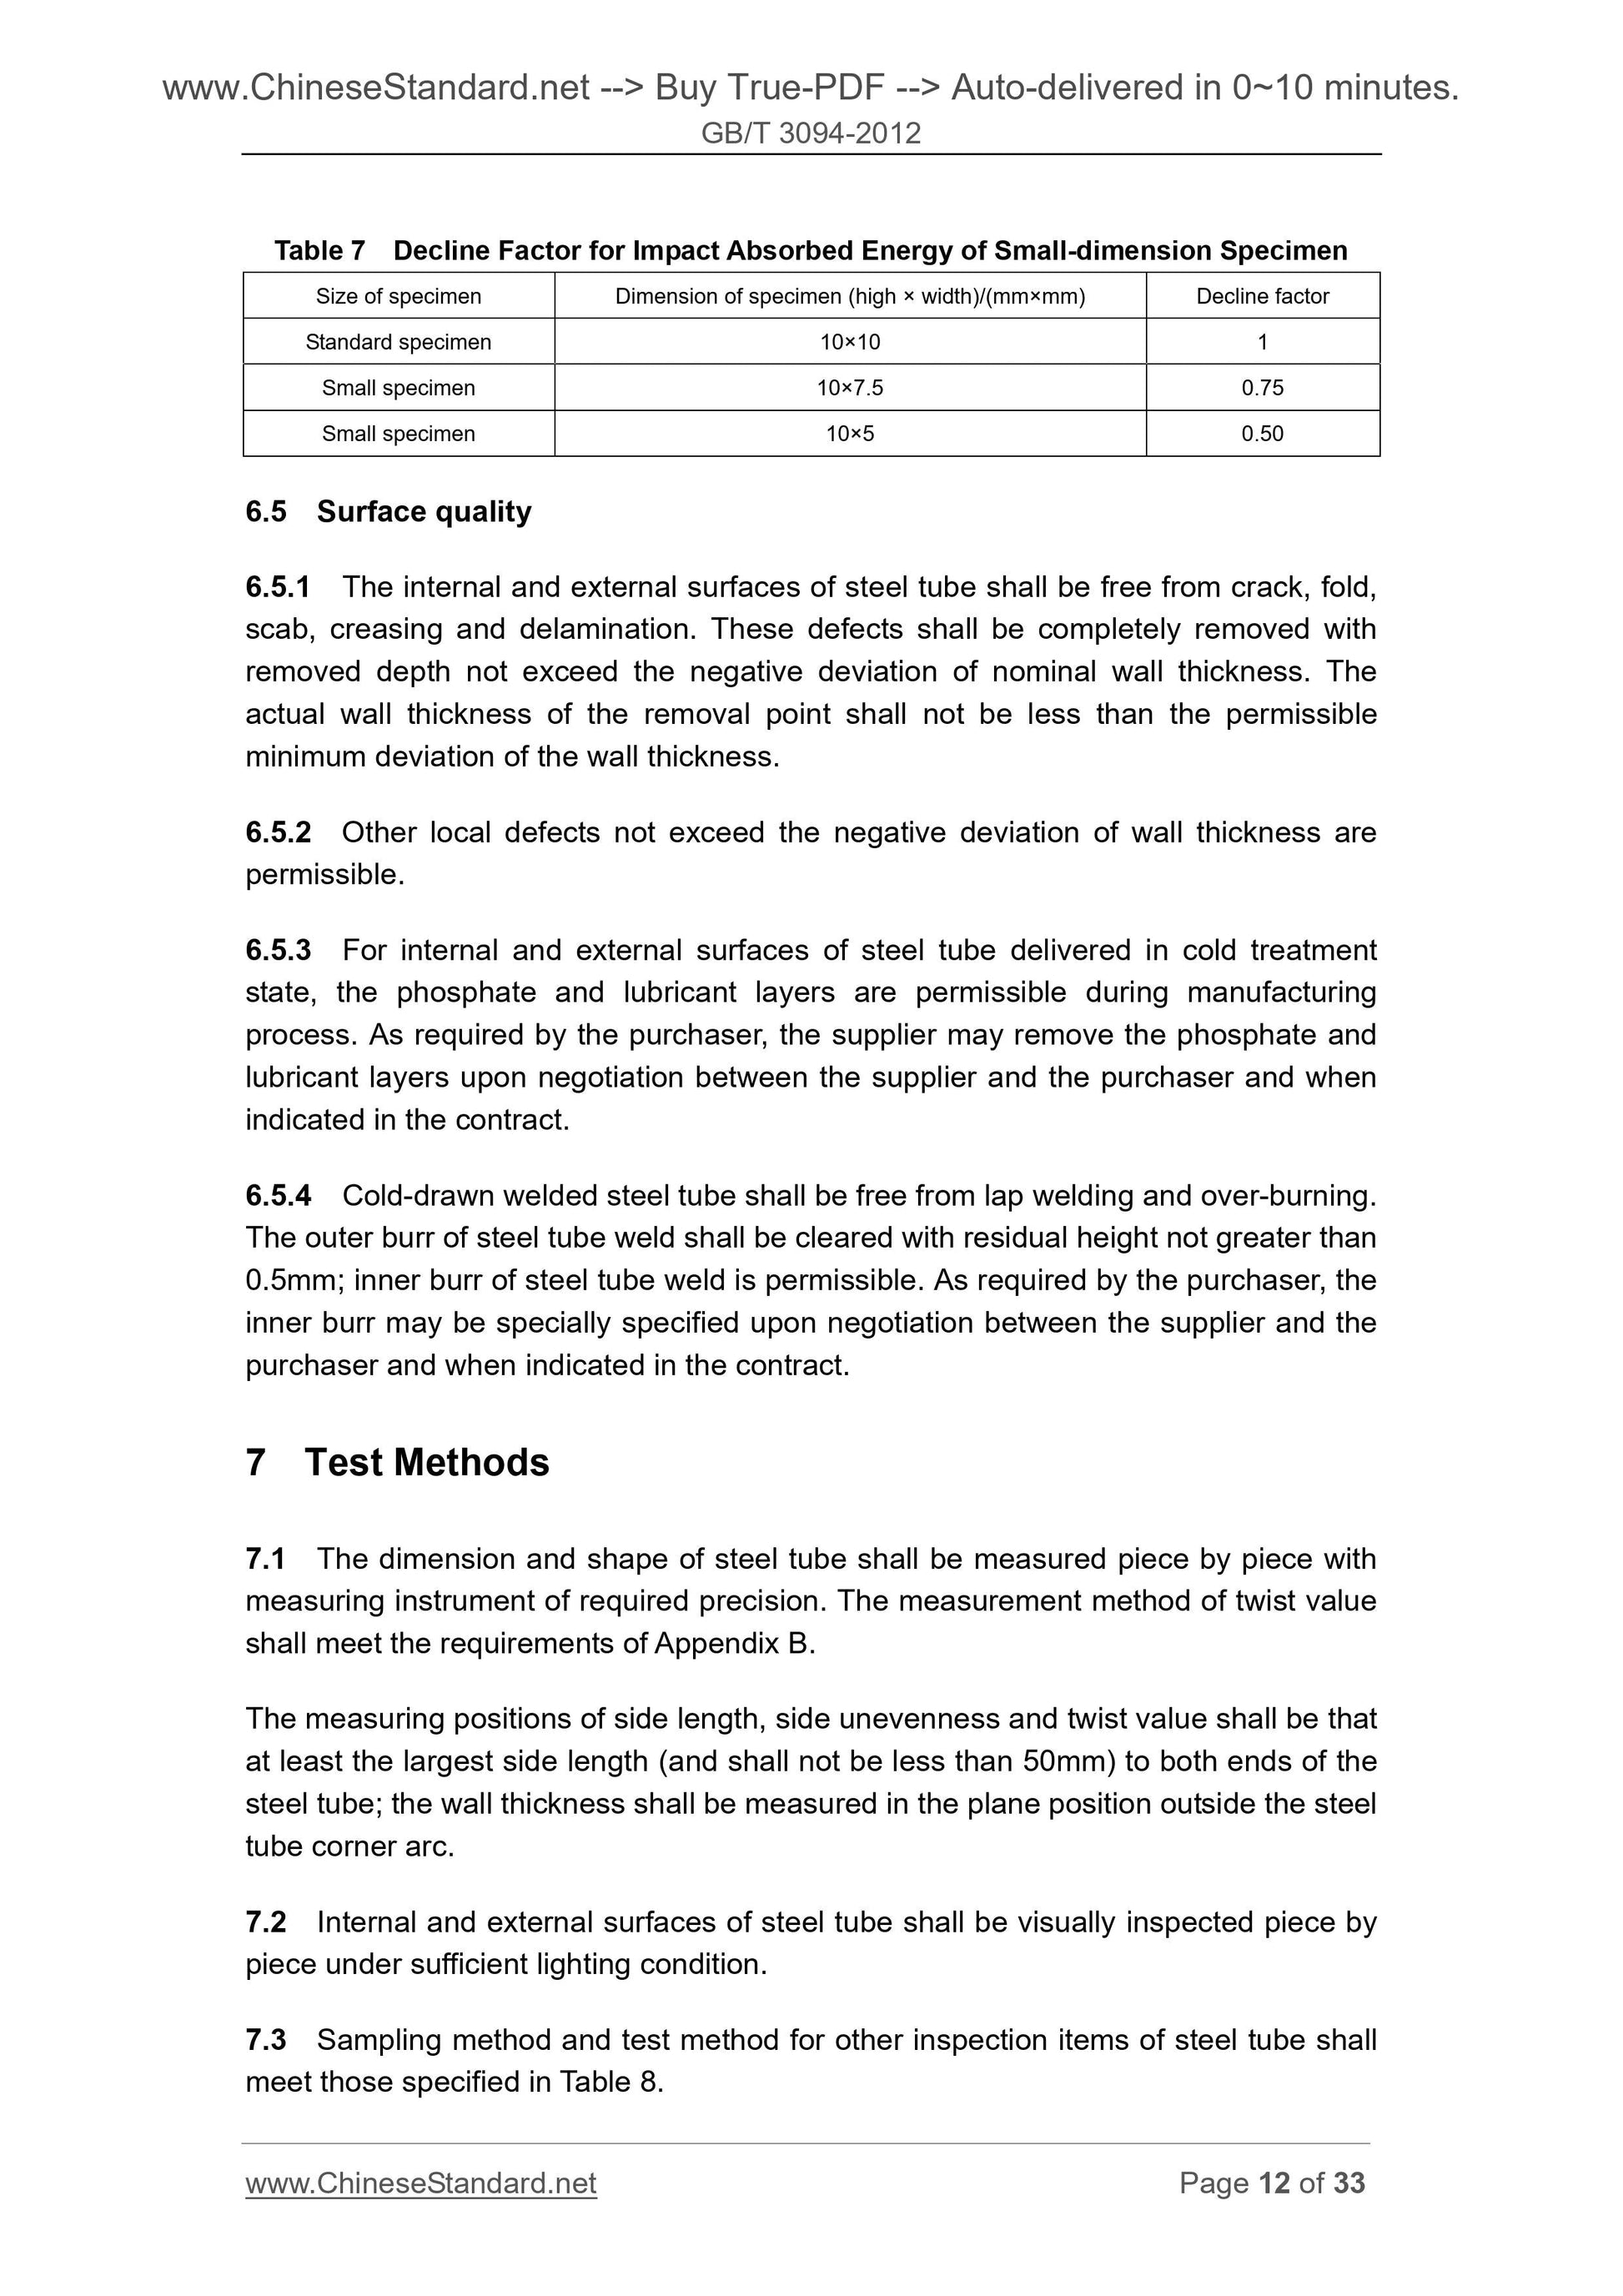 GB/T 3094-2012 Page 10